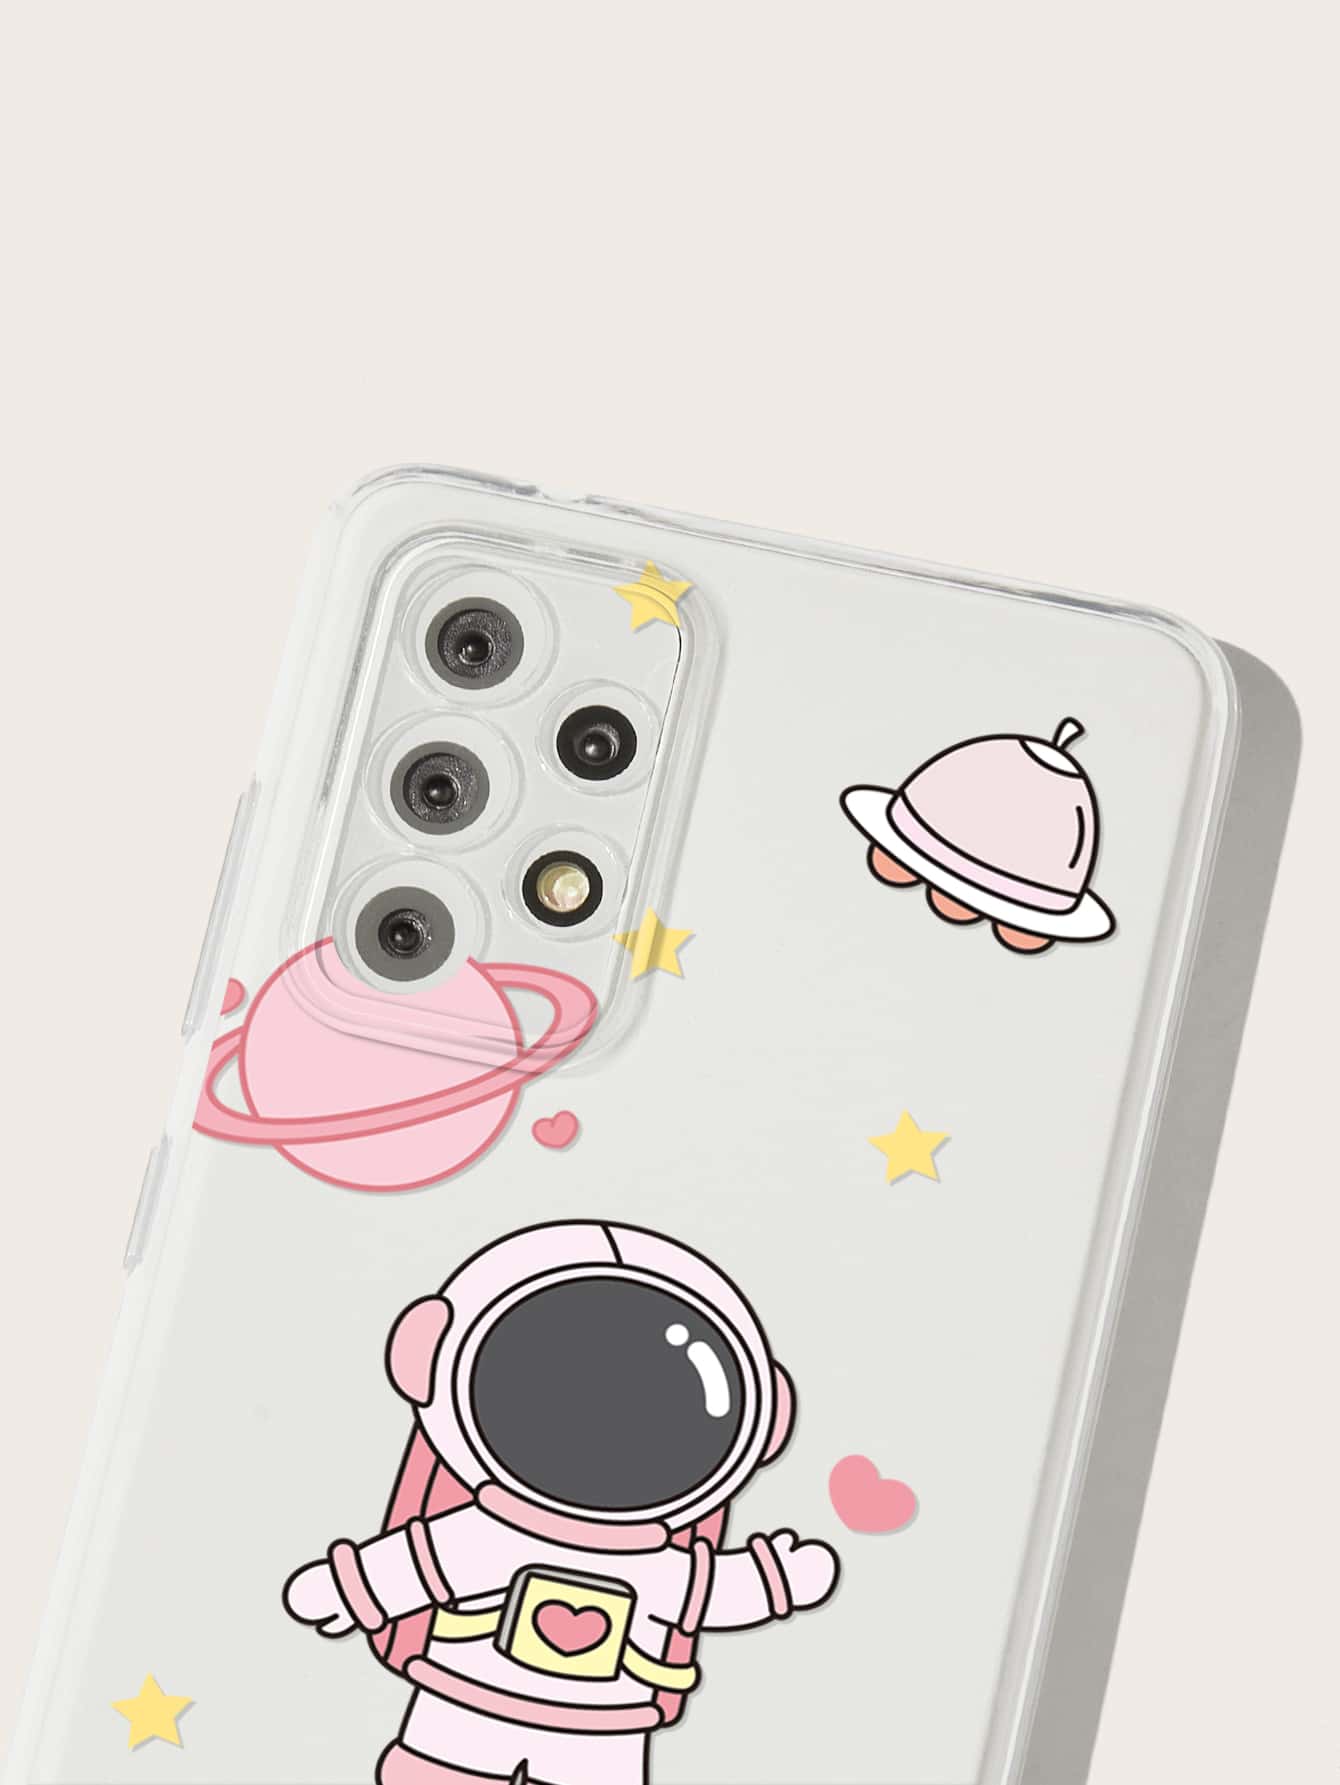 Couple Astronaut Pattern Cute Clear Silicon Case Cover